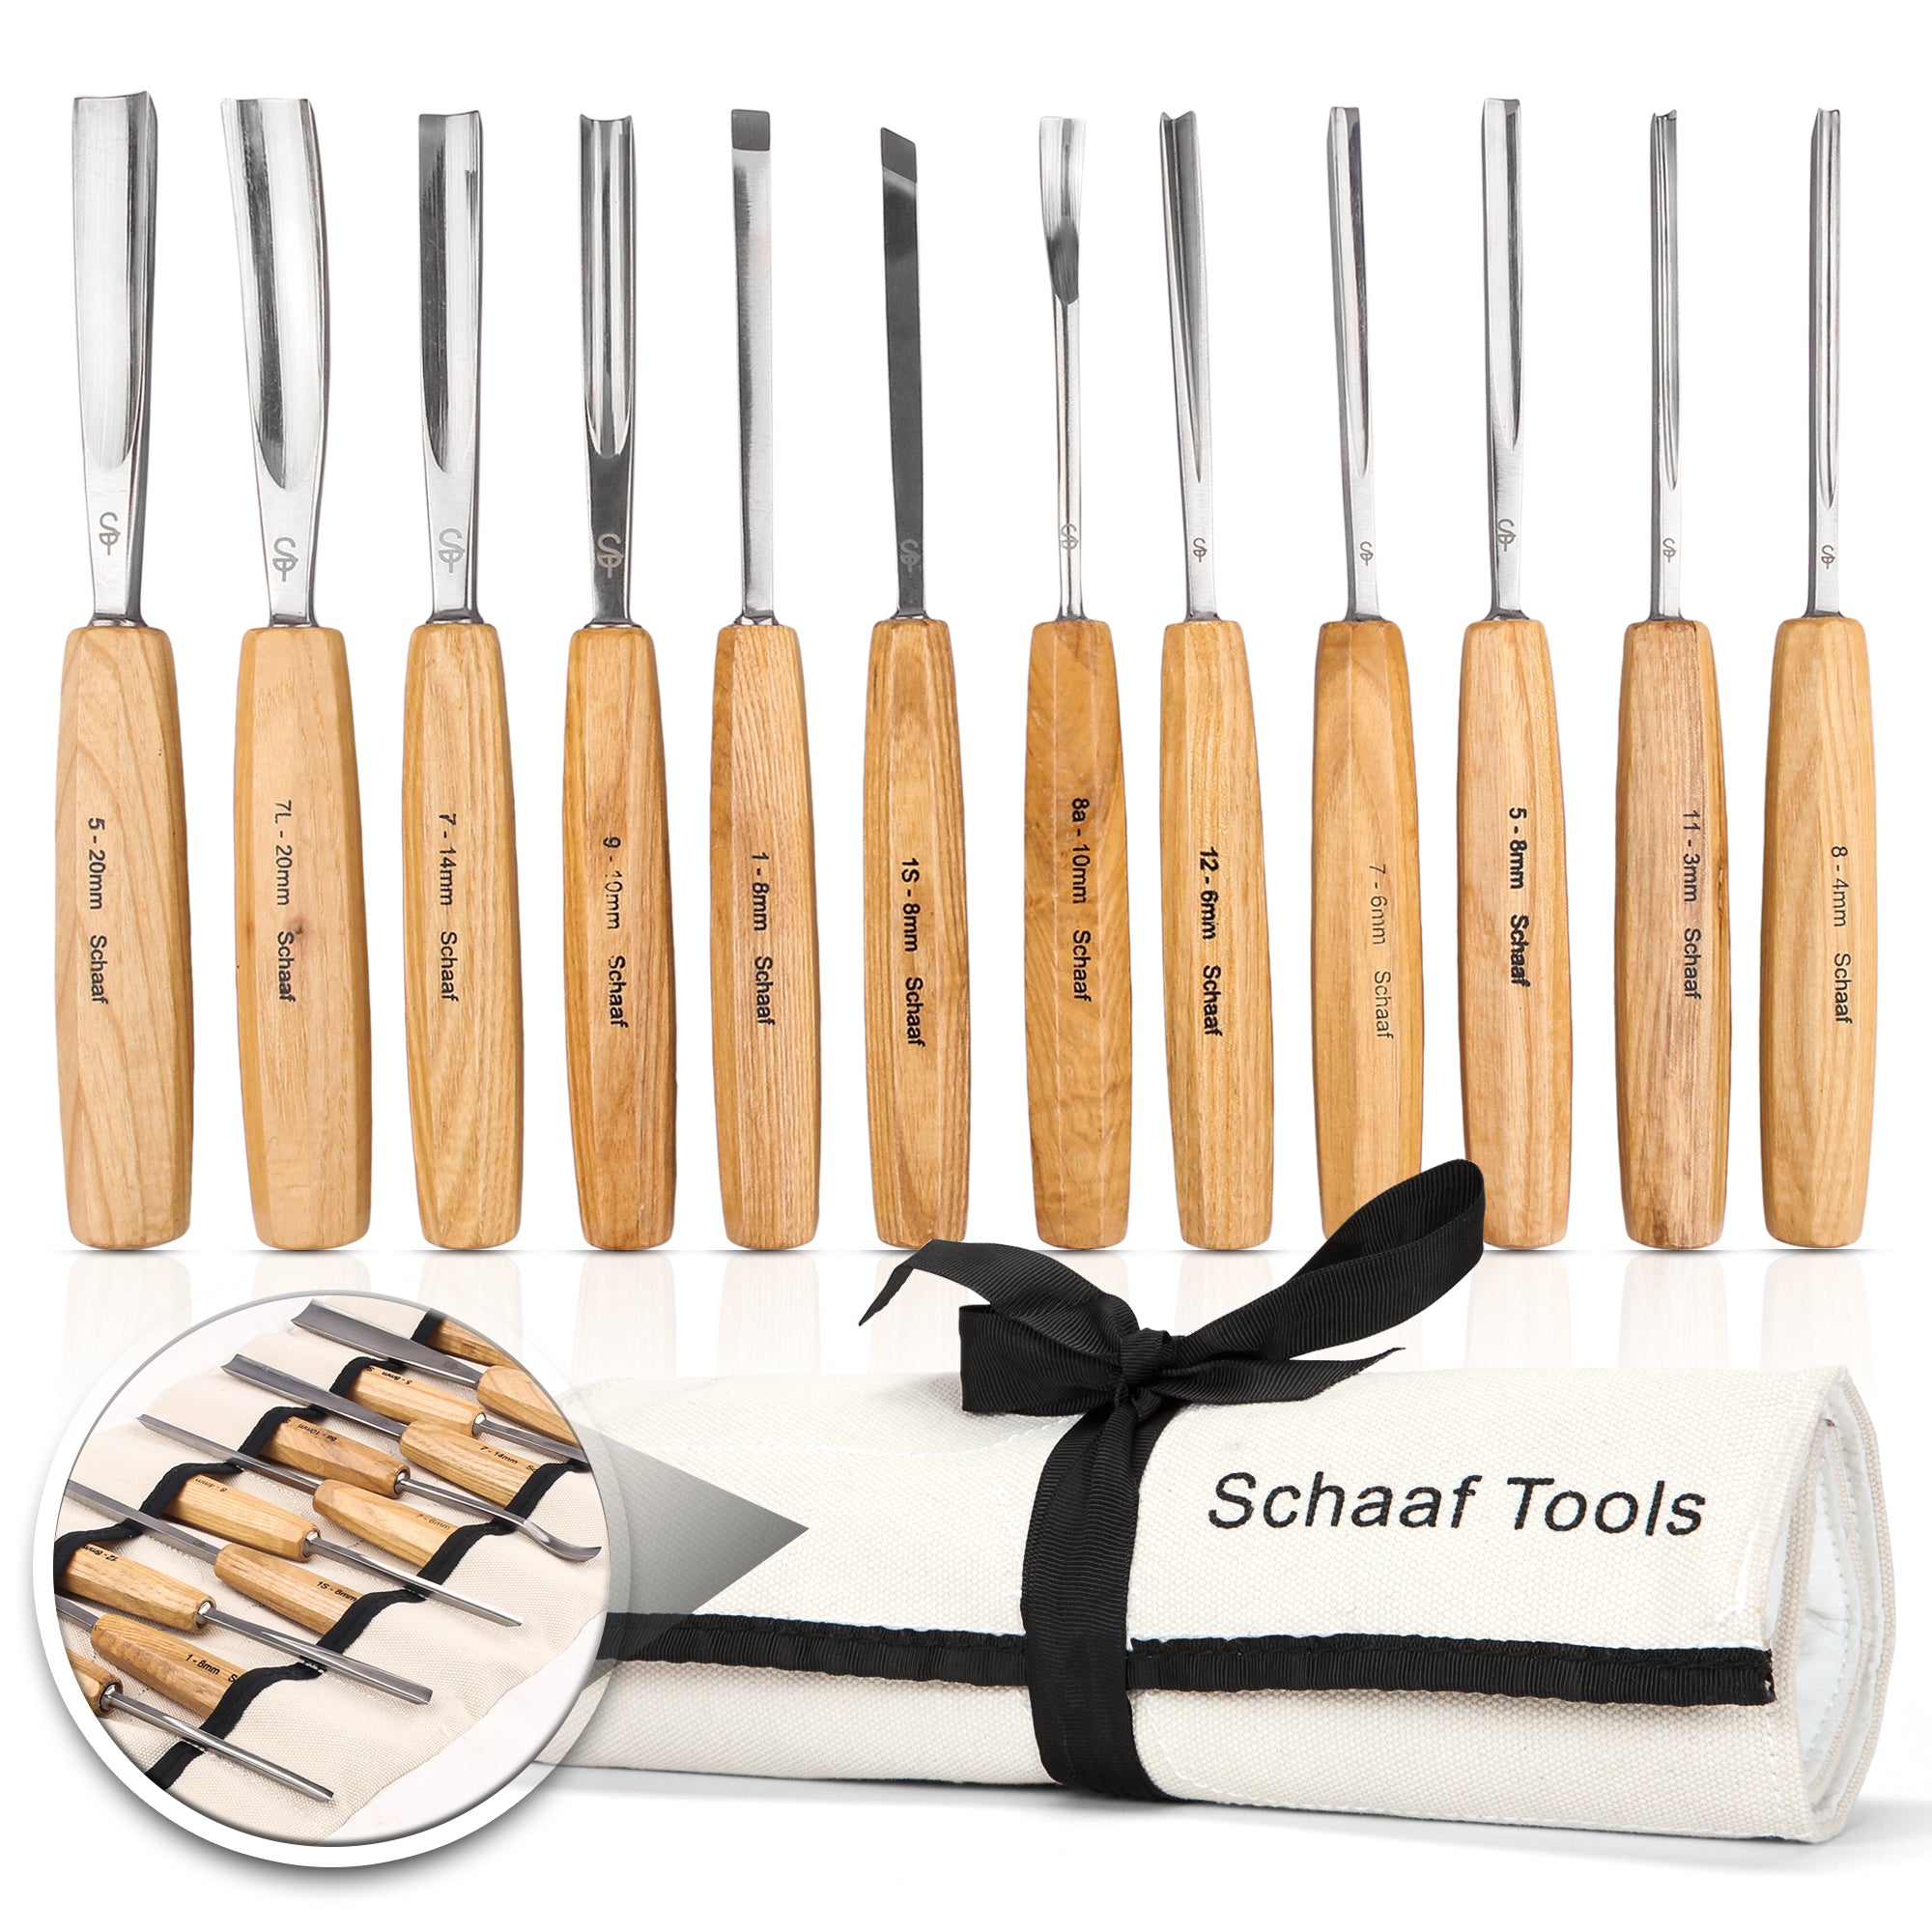 which wood carving set is best? 2